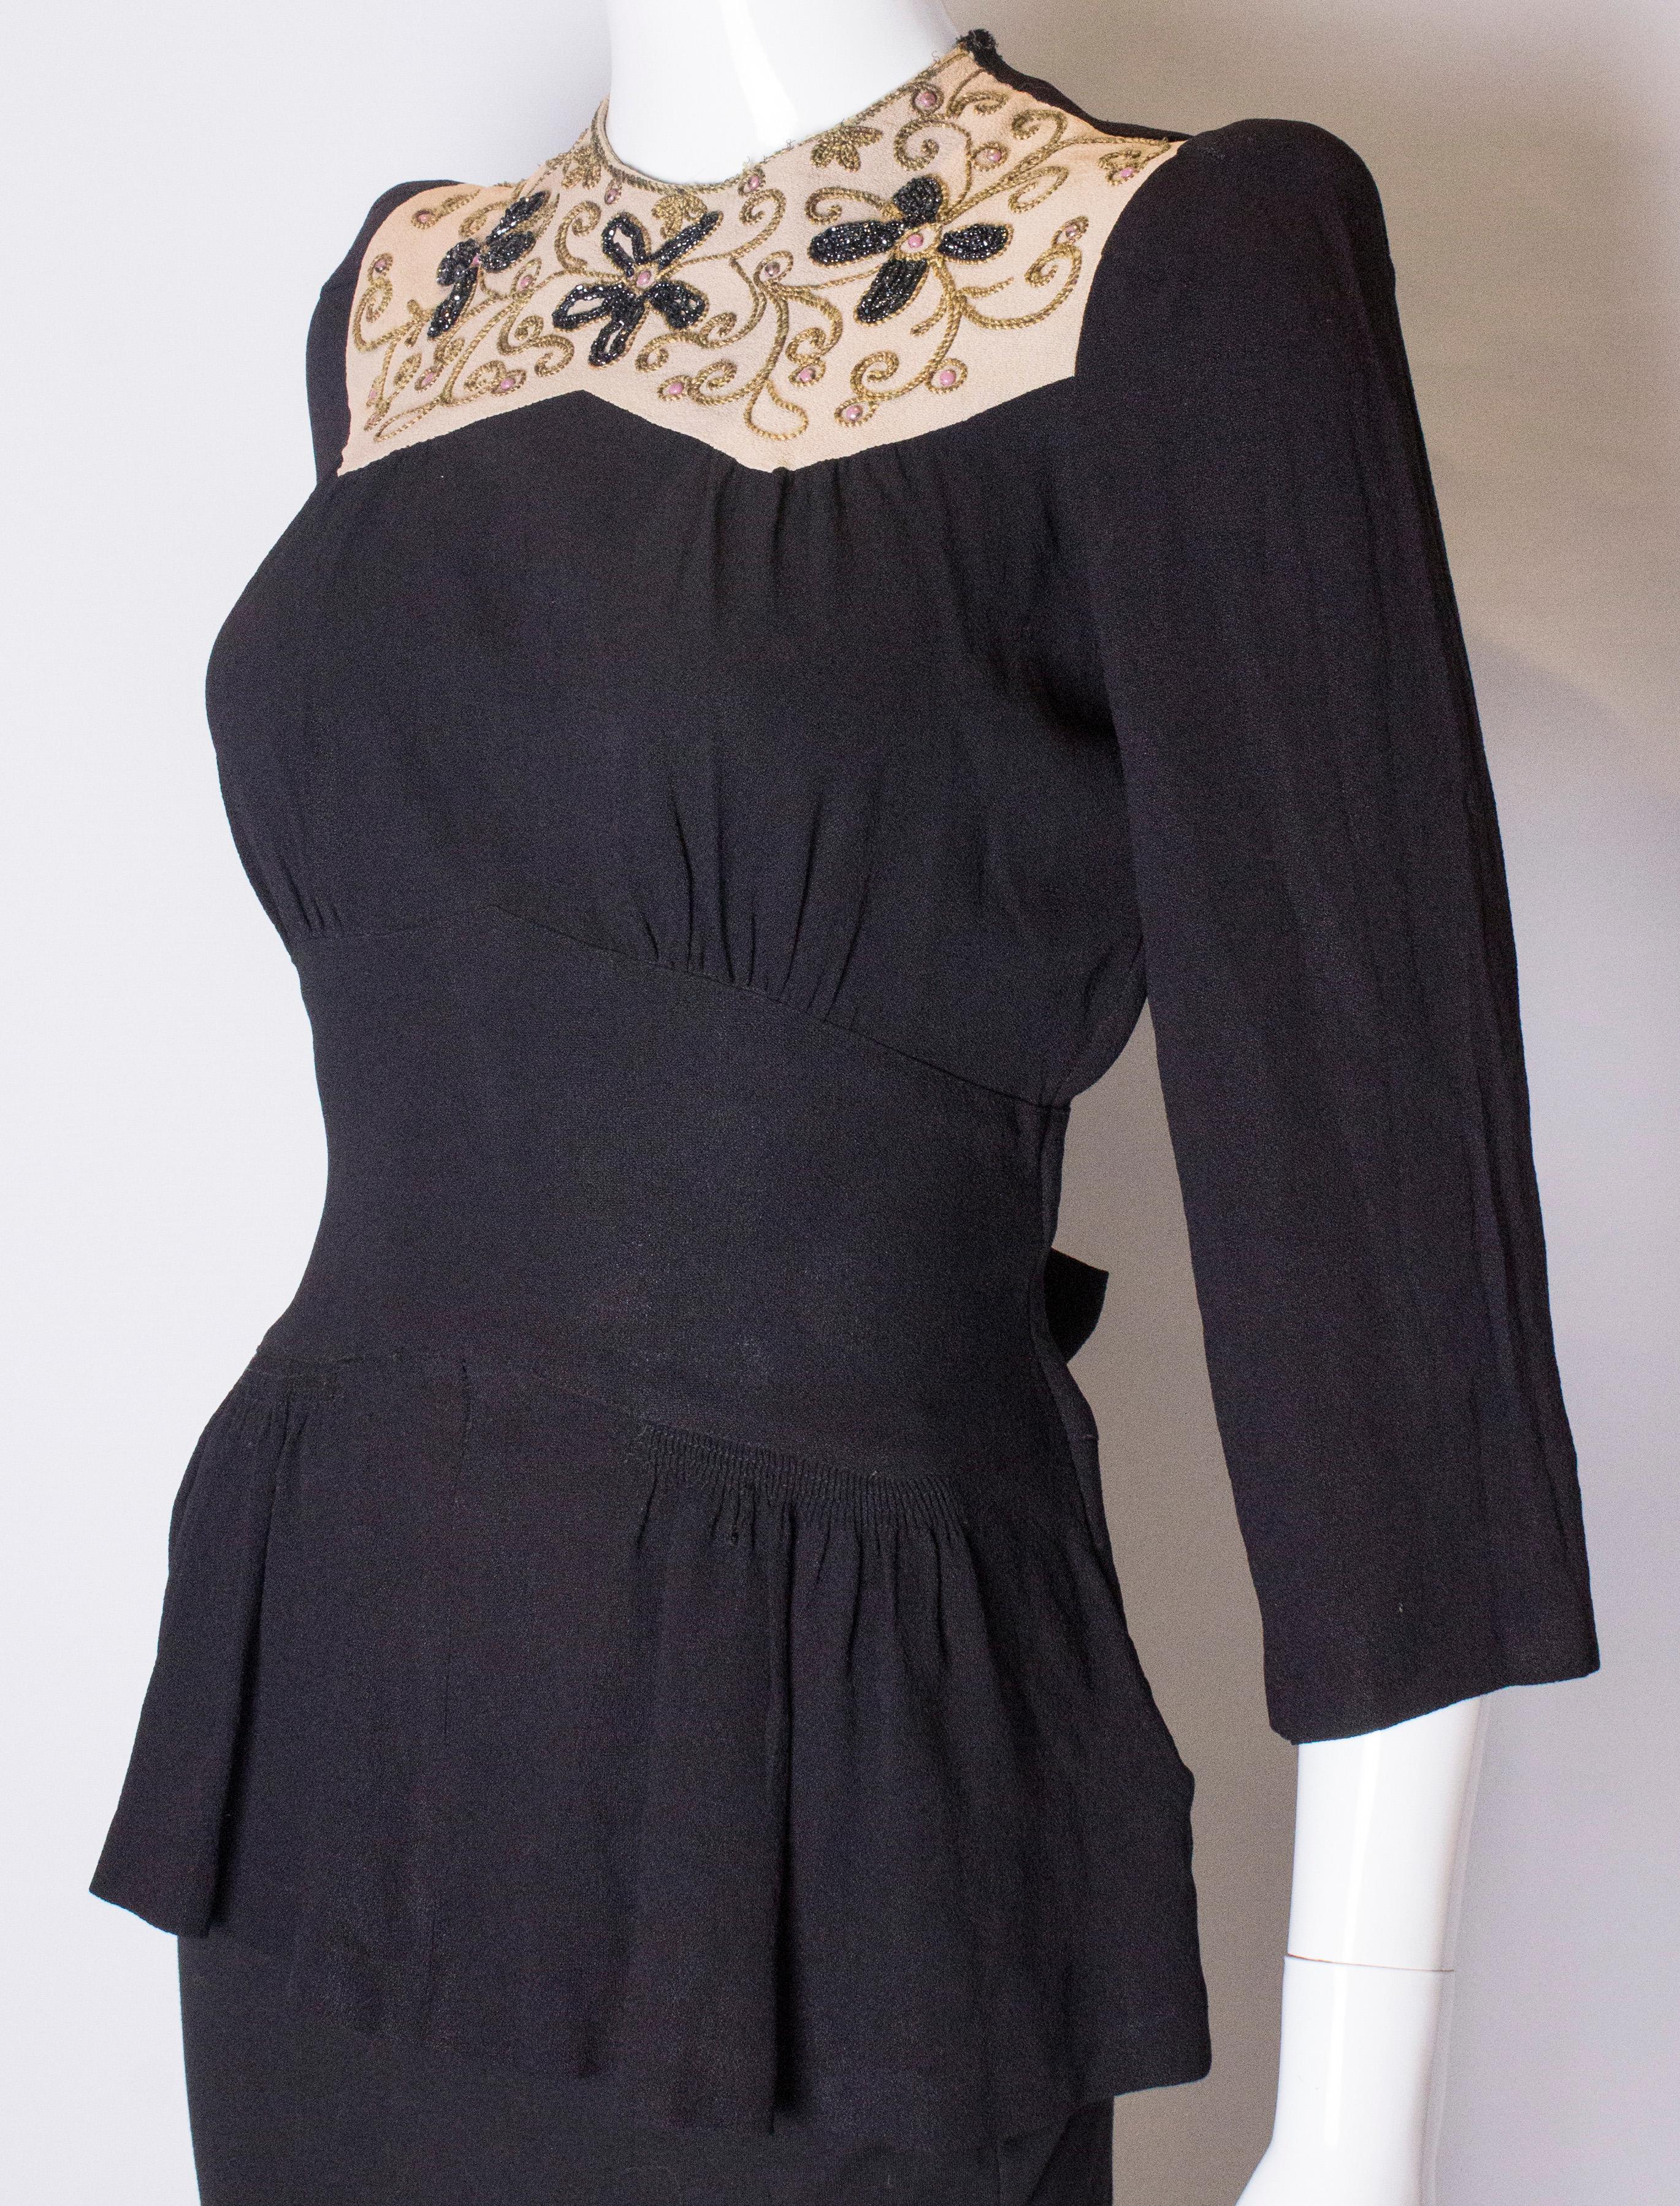 A vintage 1940s black applique and beaded tie back top blouse small (Schwarz)